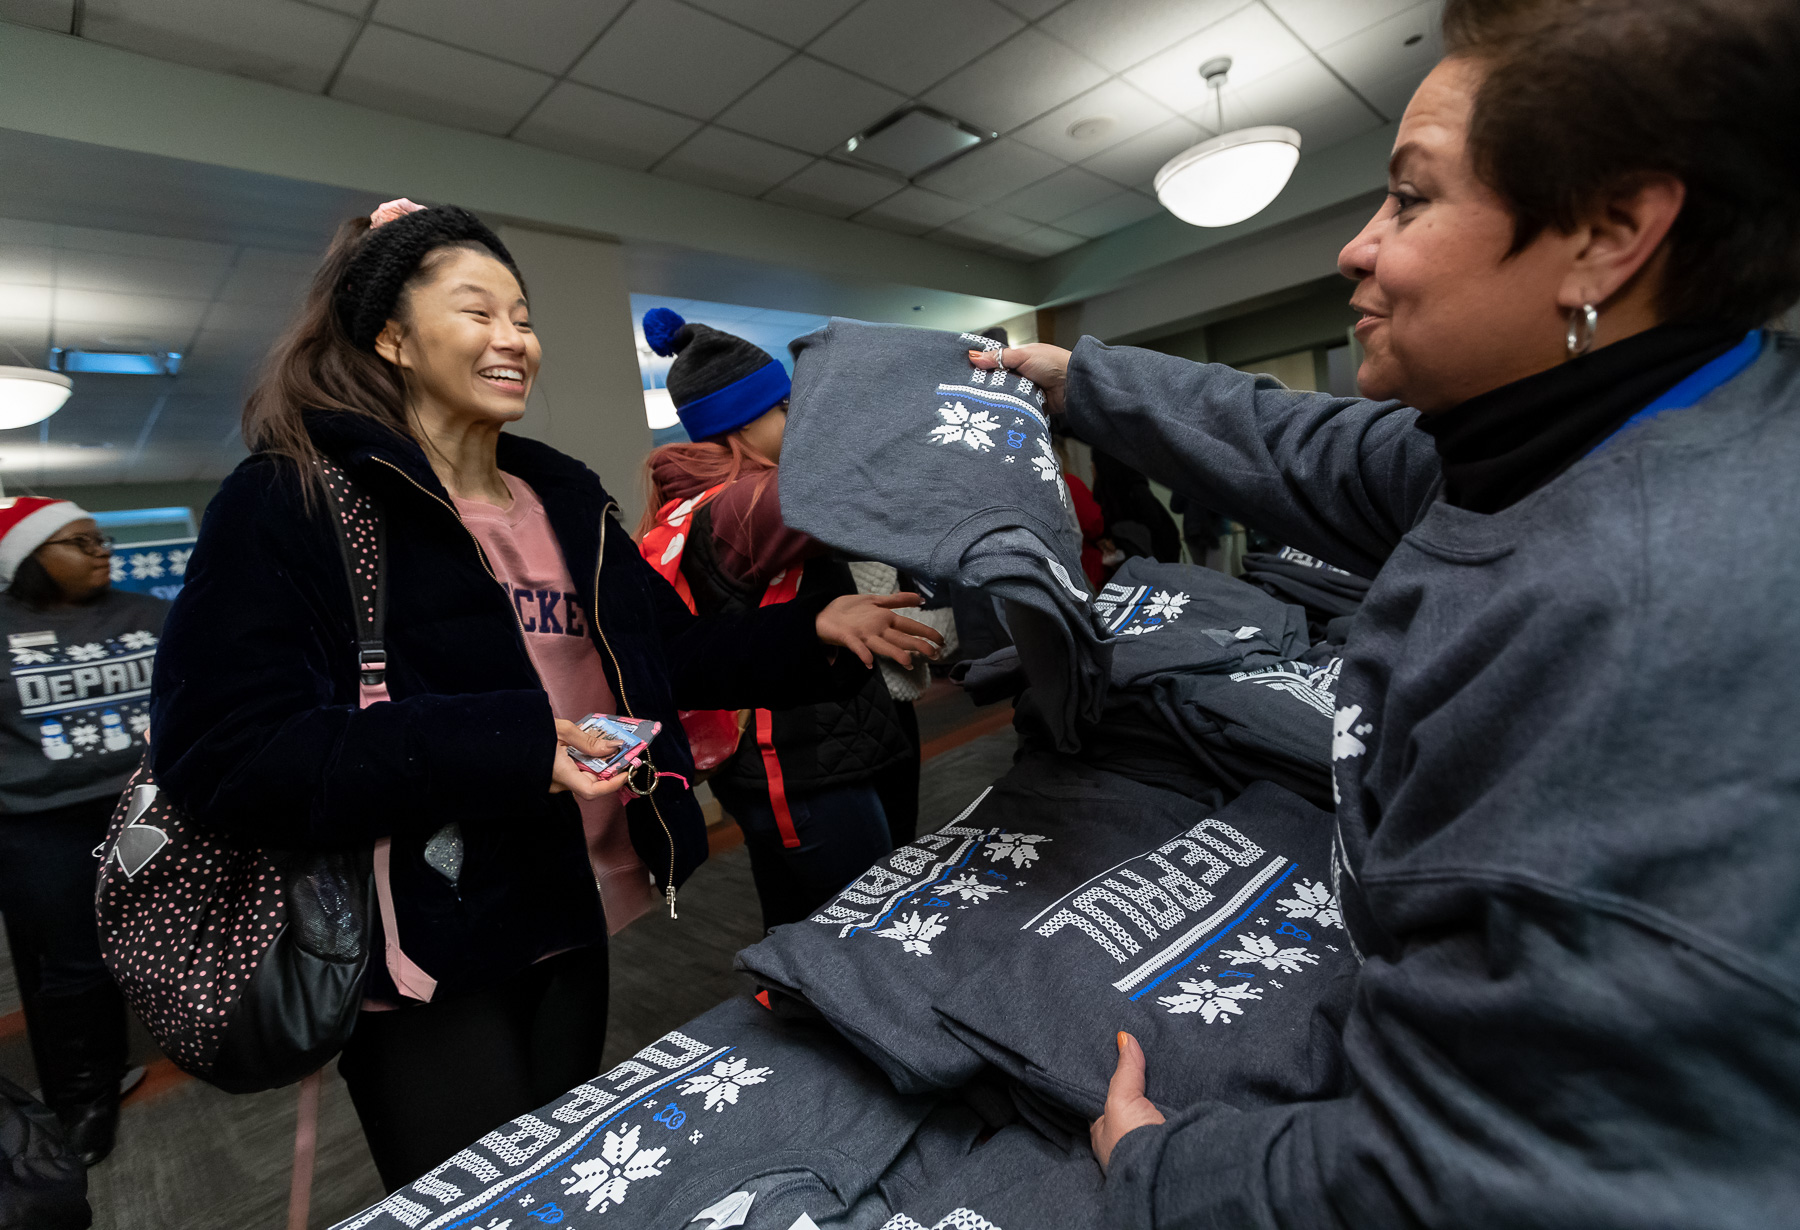 A student happily receives one of the coveted “ugly sweaters” from staff member Maria Toscano during the Ugly Sweater Party. (DePaul University/Jeff Carrion)